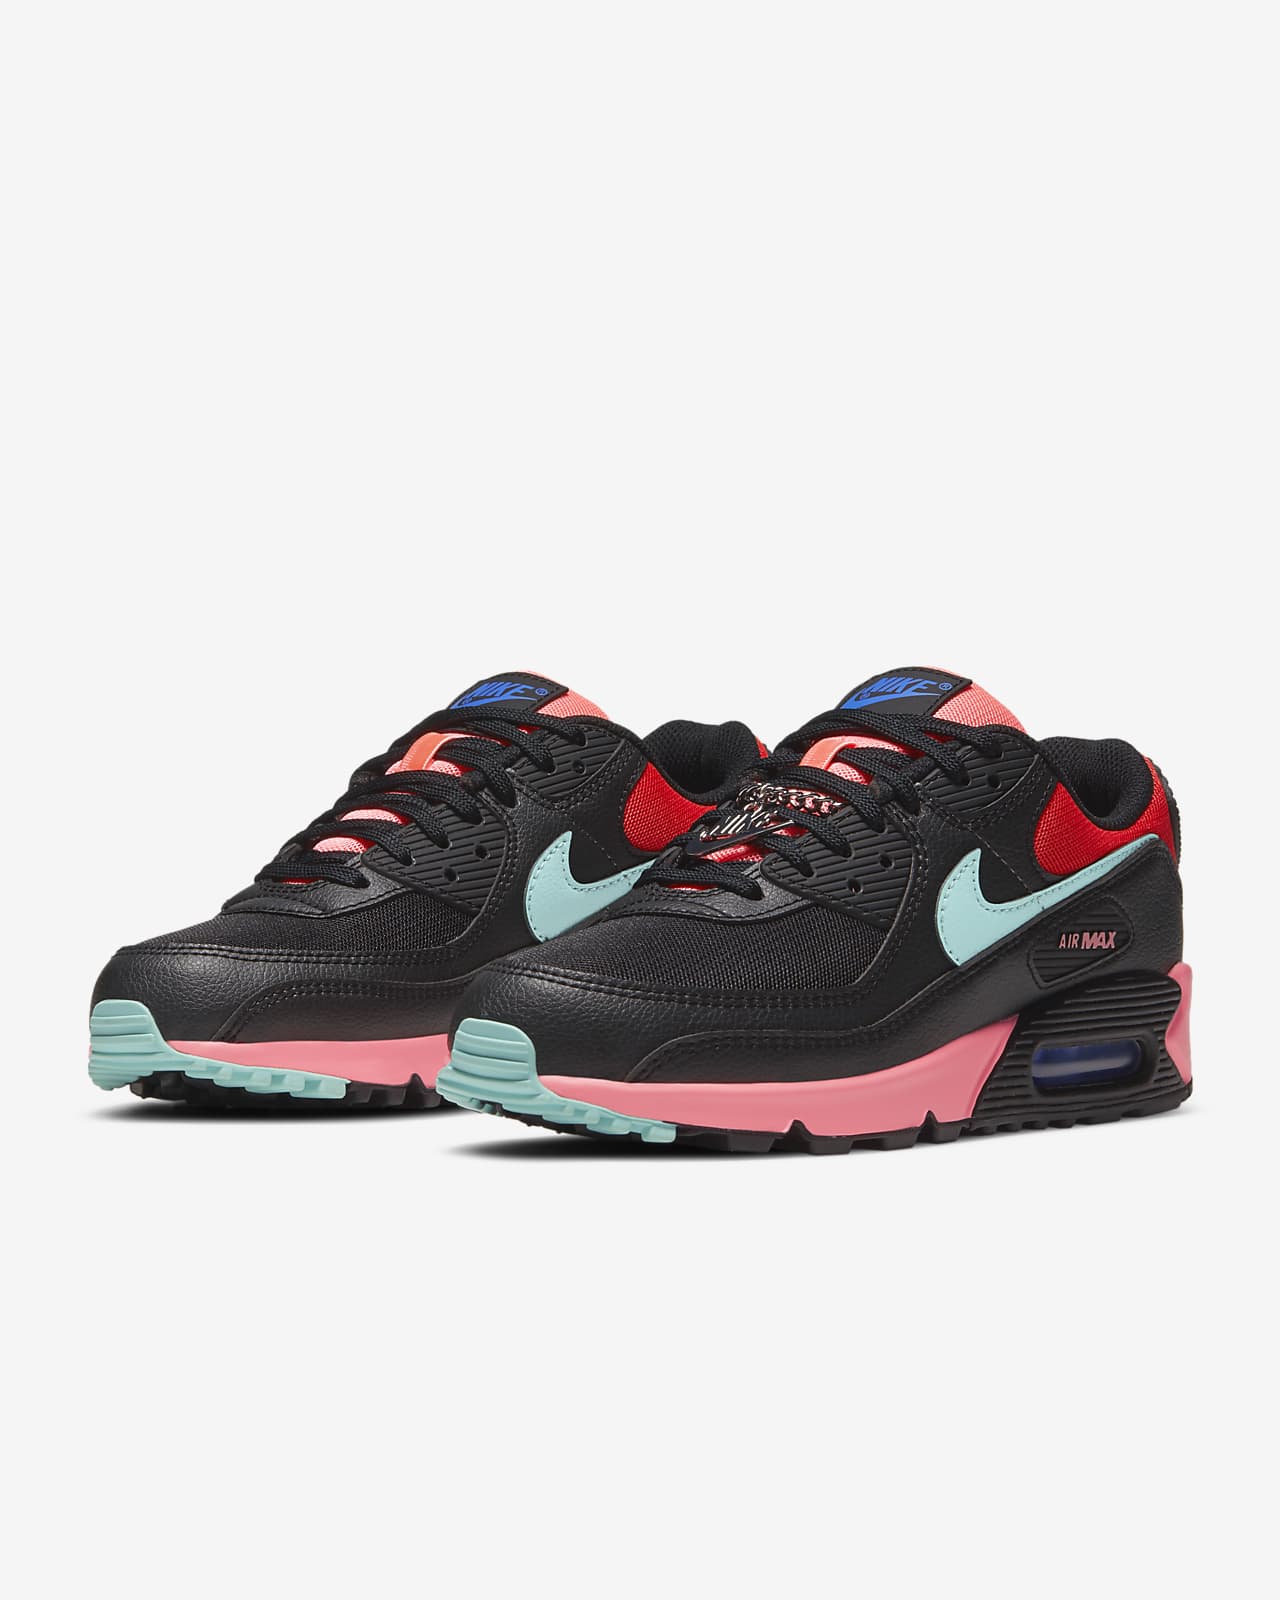 nike air max 90 womens red and white